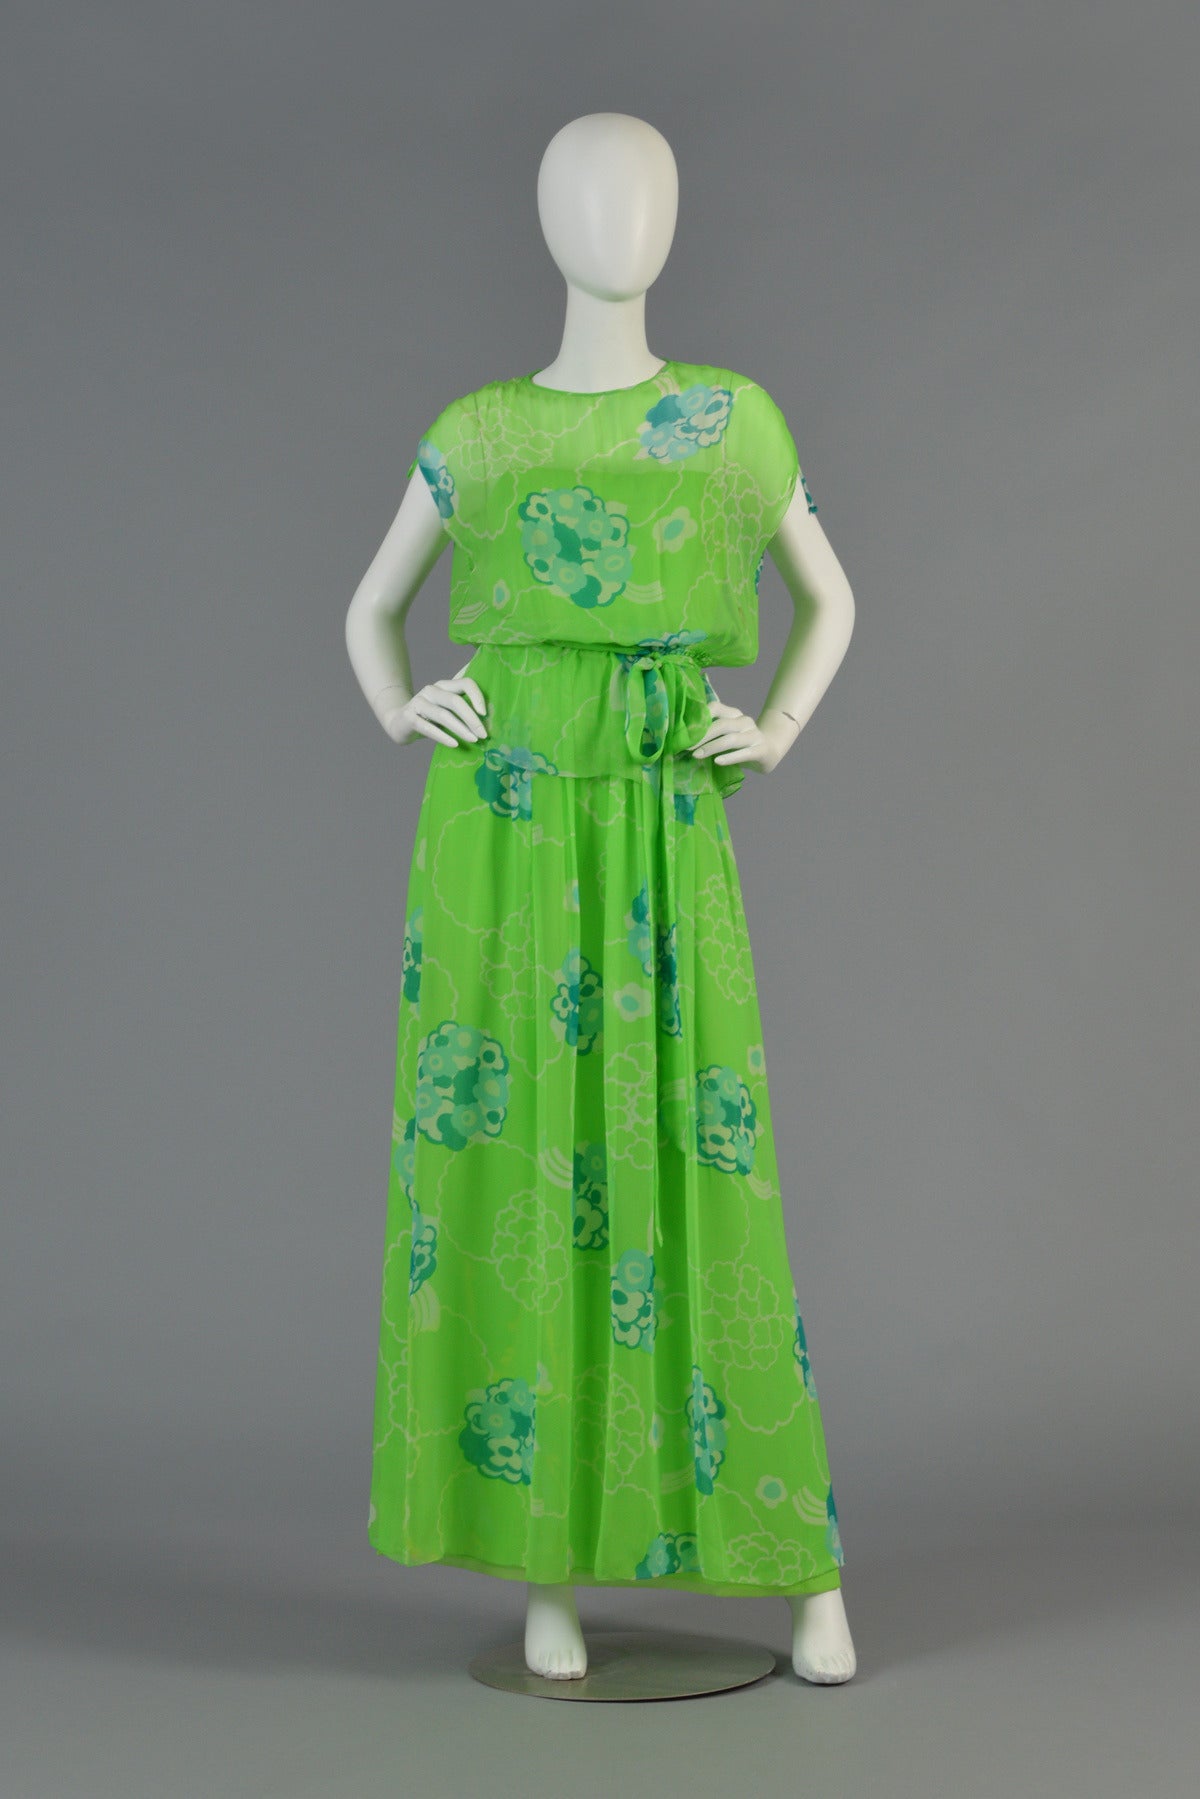 Fantastic vintage 1970s 3-pc silk chiffon floral gown by Adele Simpson. Incredible shade of green with graphic florals. Ensemble consists of full-length maxi gown with spaghetti straps, a sheer boxy/kimono-style top with elastic waist and a matching